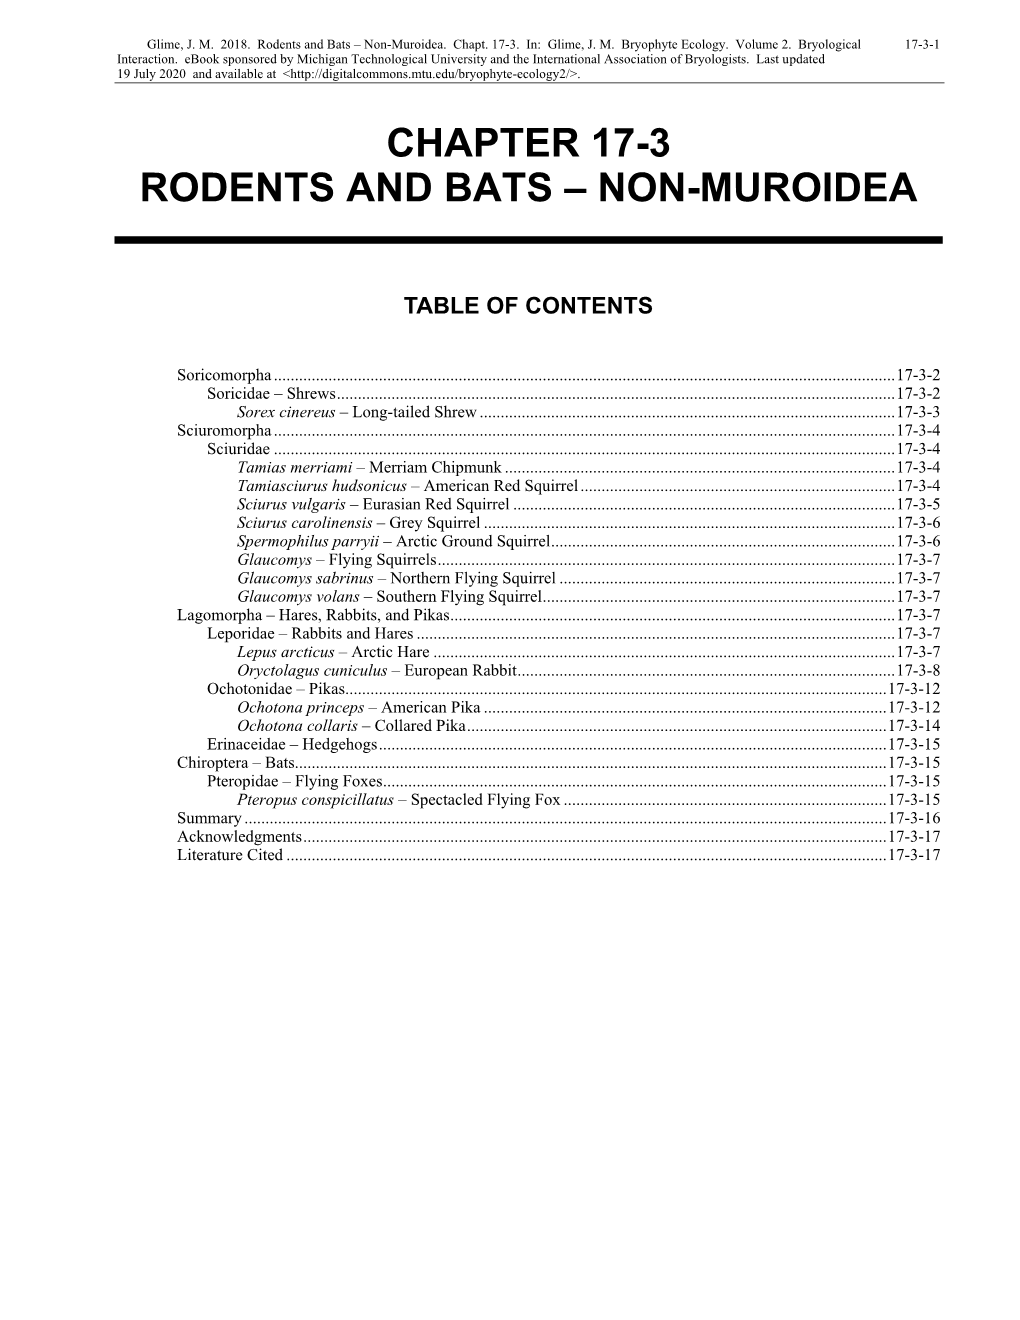 Volume 2, Chapter 17-3: Rodents and Bats-Non-Muroidea